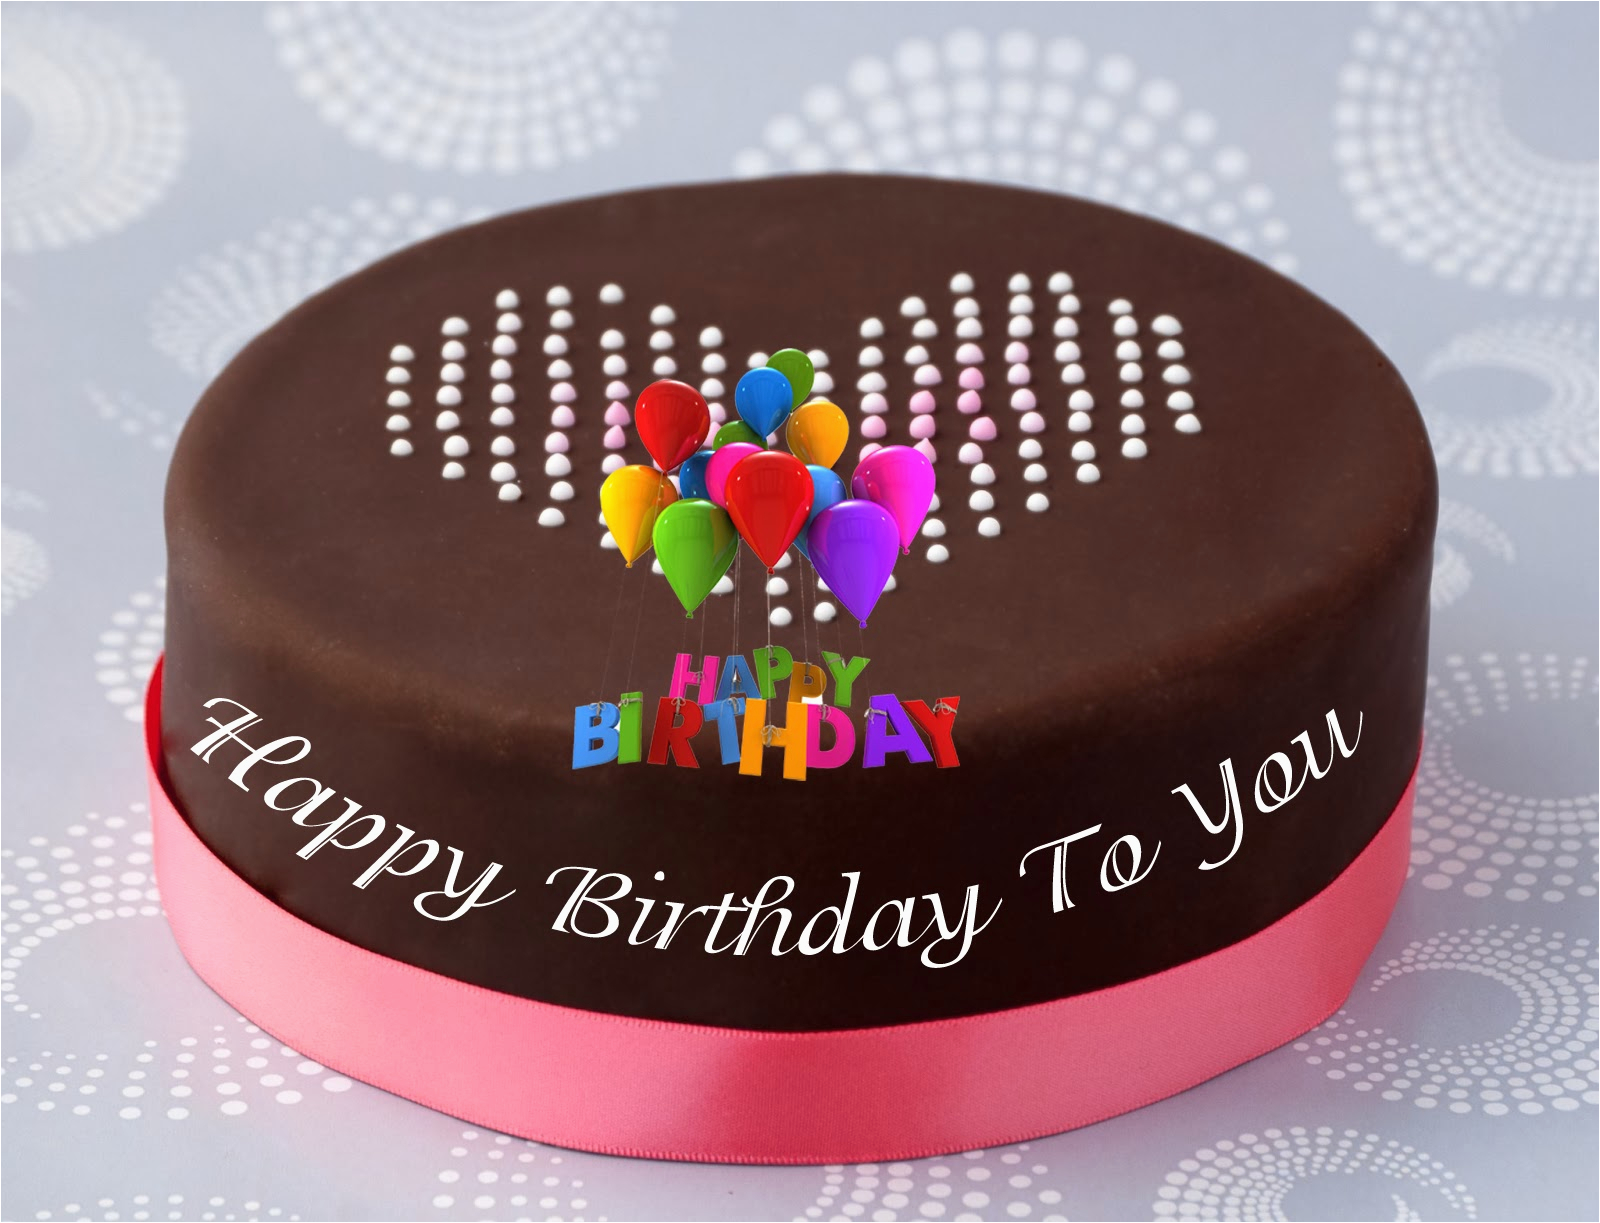 lovable images happy birthday greetings free download